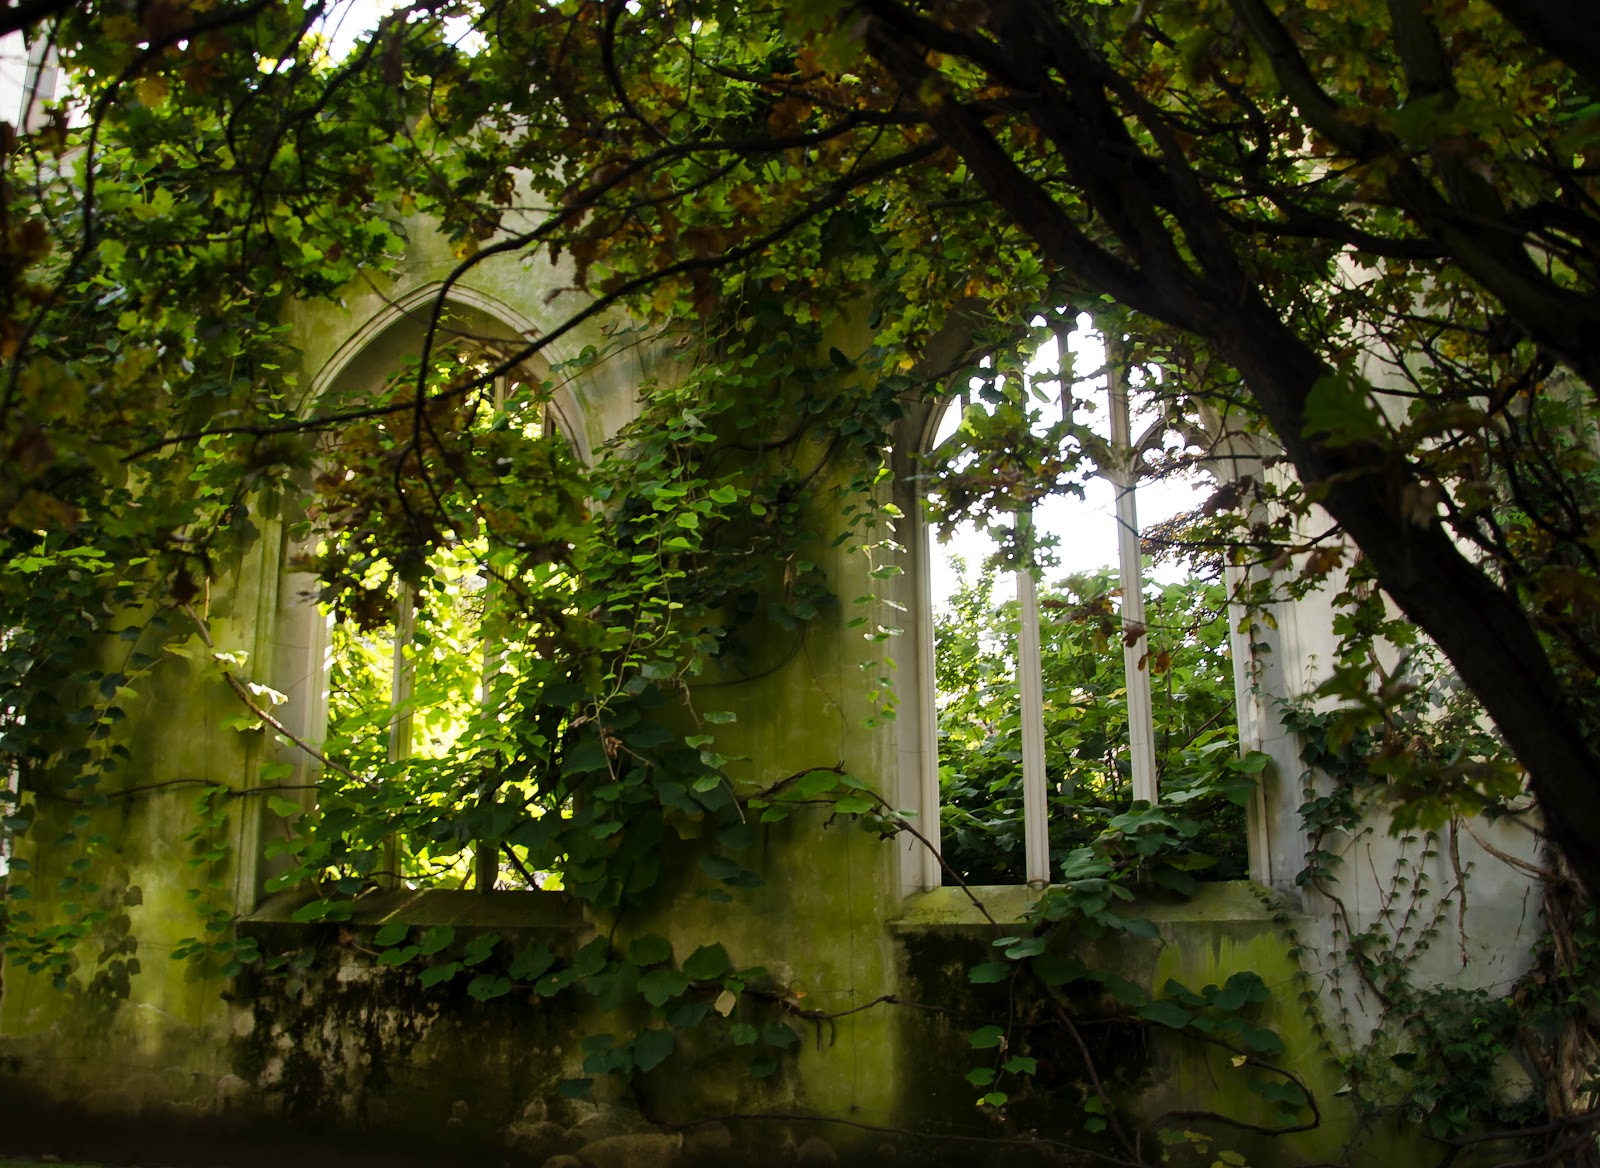 The Blond travels: The Blond discovers: St Dunstan in the East (London)